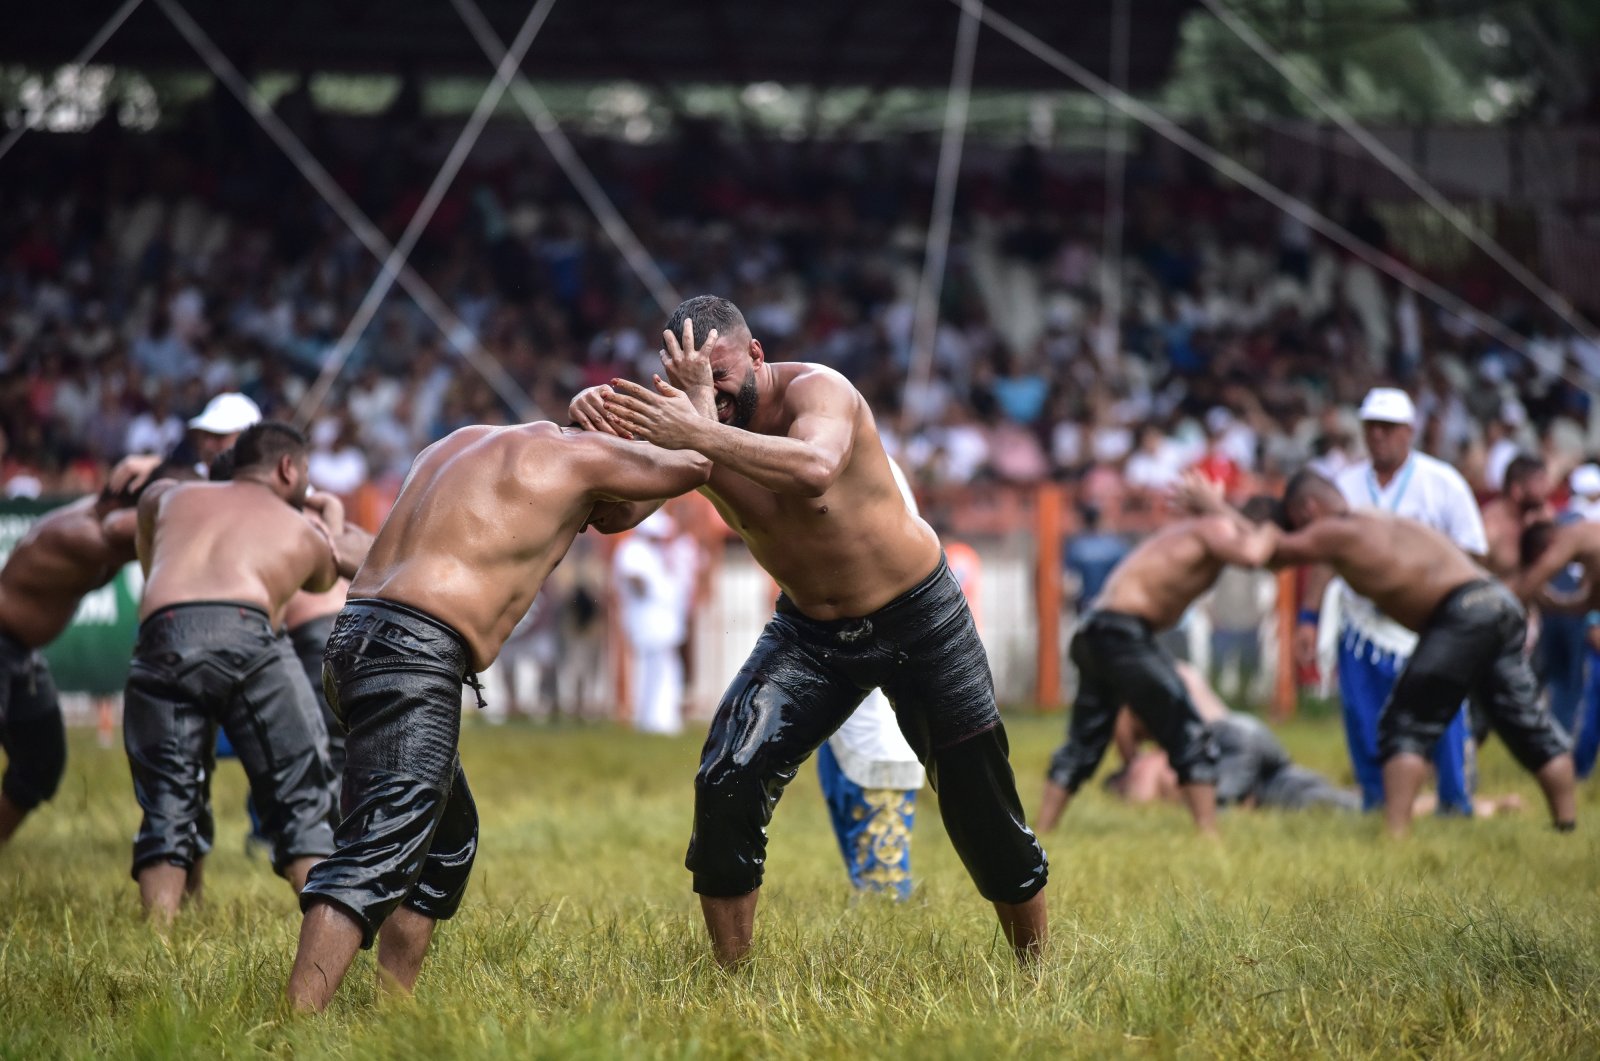 Two oil wrestlers are seen during a match held as part of the 658th Kırkpınar Oil Wrestling tournament at the Sarayiçi wrestling stadium, Edirne, Turkey, July 8, 2019. (DHA Photo).